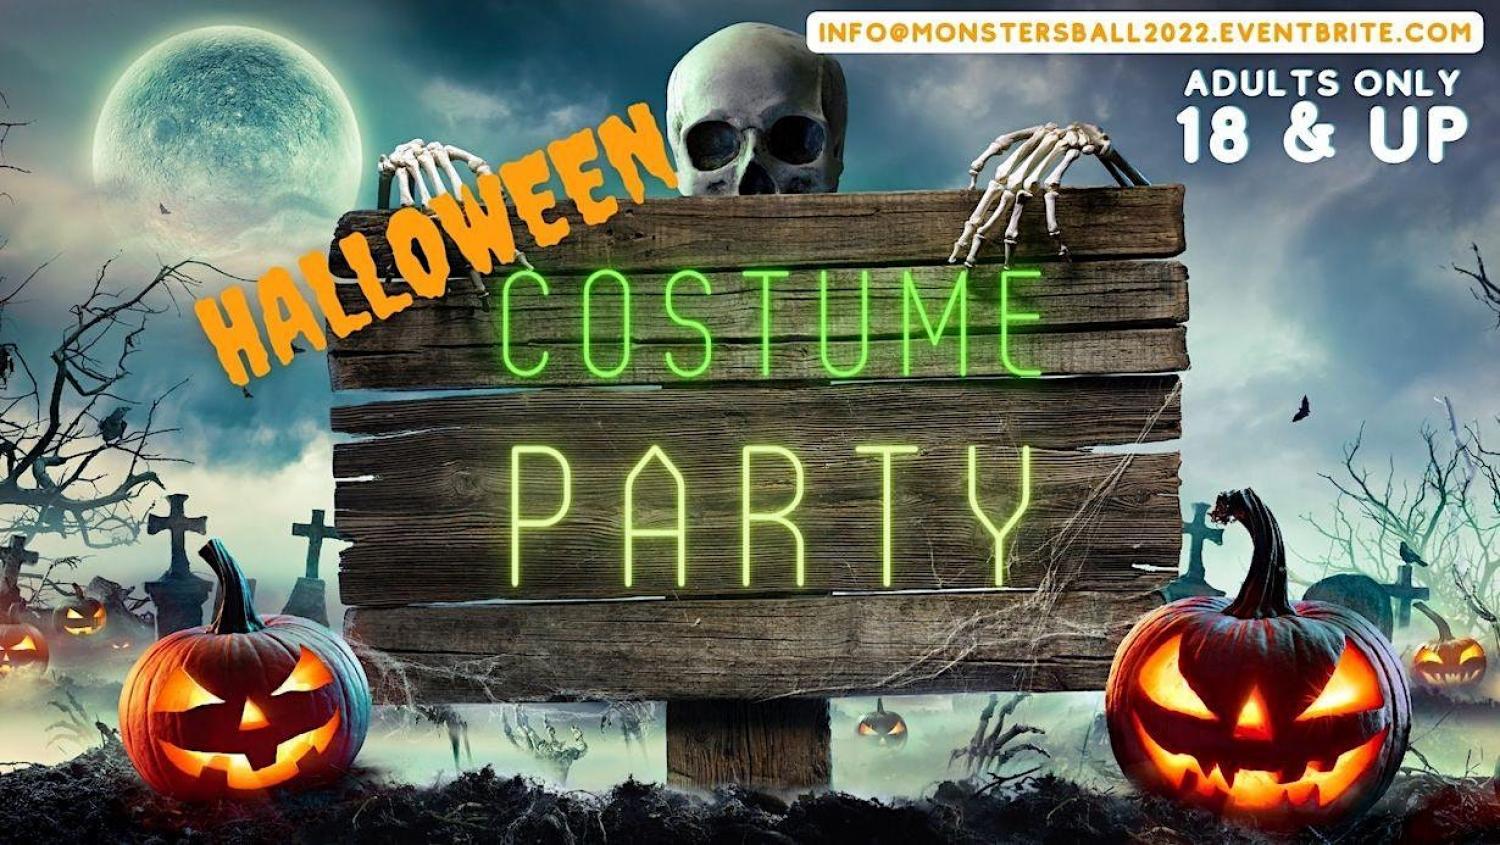 Monsters Ball |A Halloween Themed Murder Mystery Costume Party (18+ only)
Sun Oct 30, 8:00 PM - Mon Oct 31, 2:00 AM
in 10 days